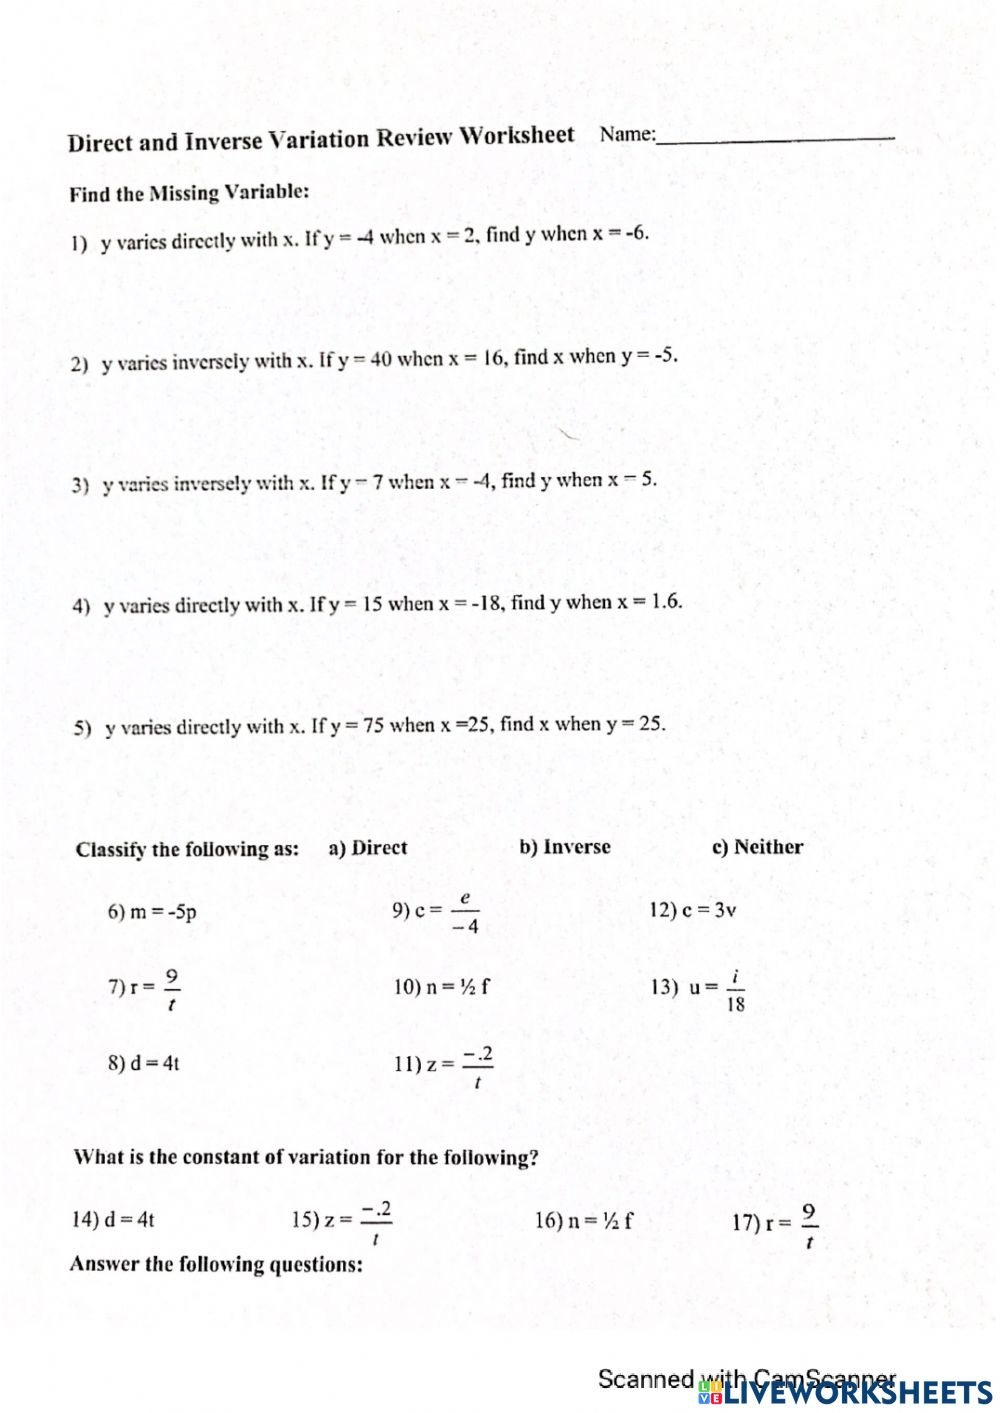 direct-and-inverse-variation-worksheet-math-worksheet-answers